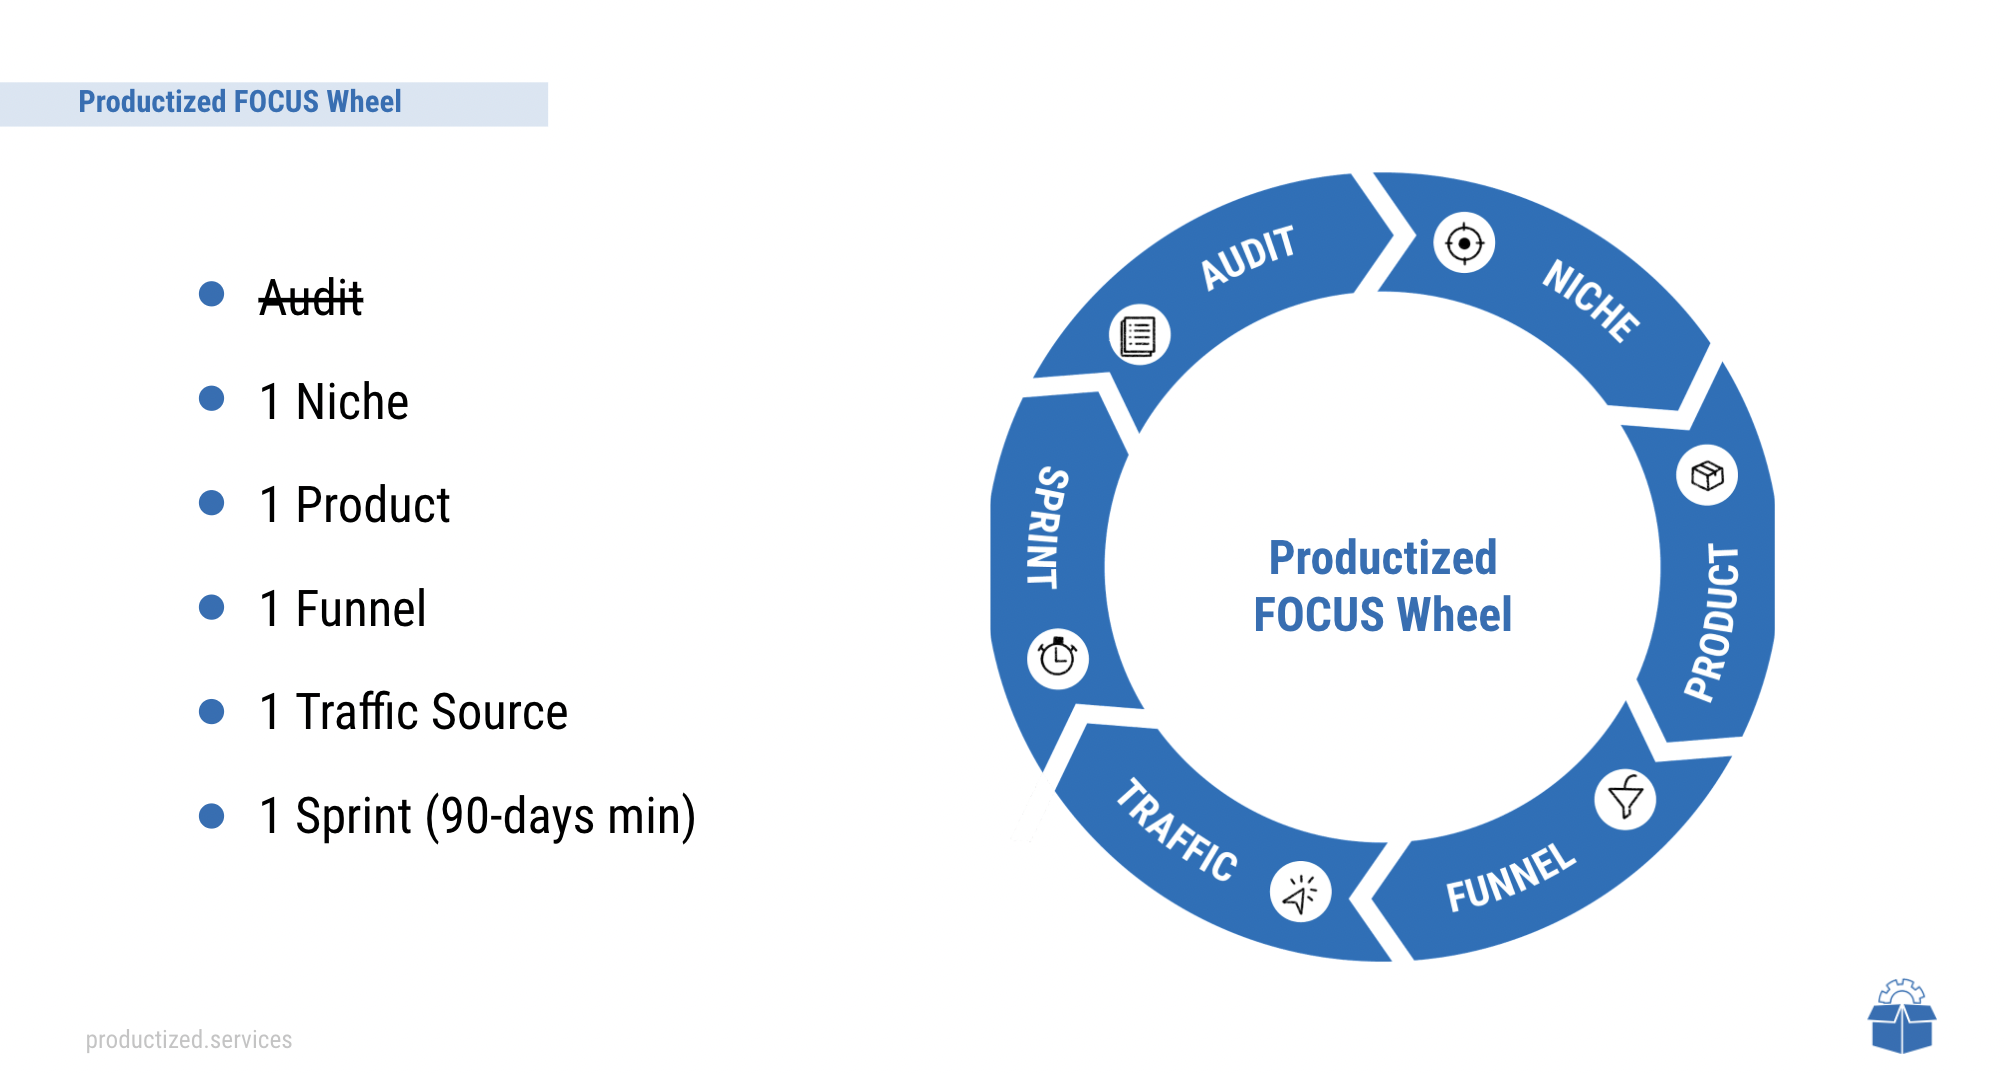 Productized Focus Wheel - The Five Ones Framwork